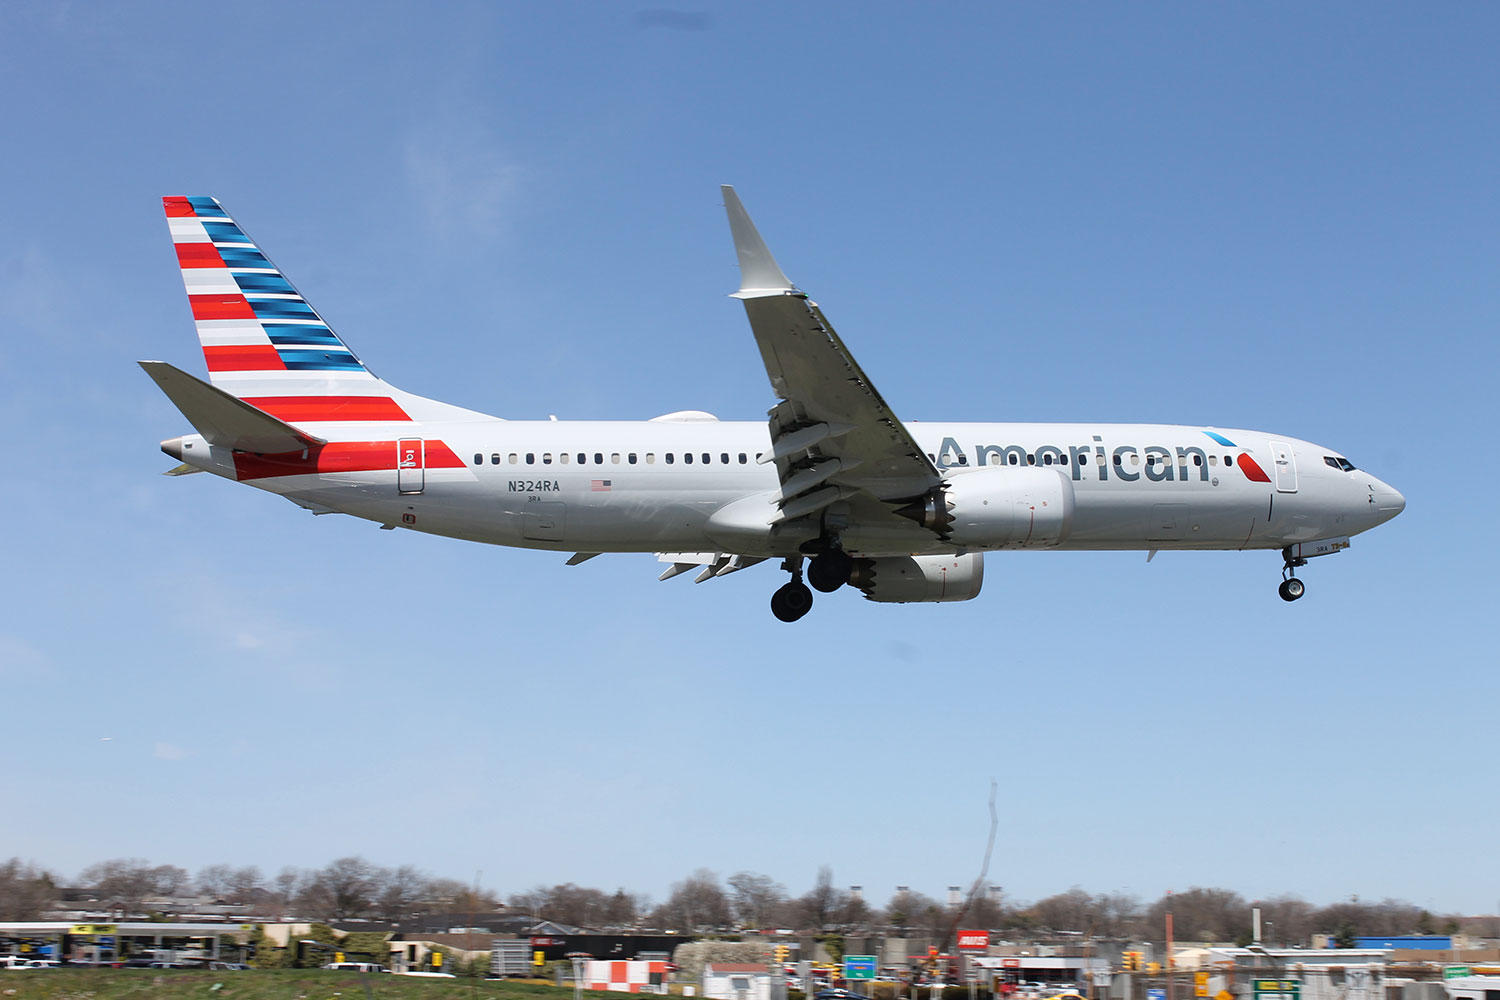 Old Livery Vs New Livery Challenge American Airlines Airport Spotting